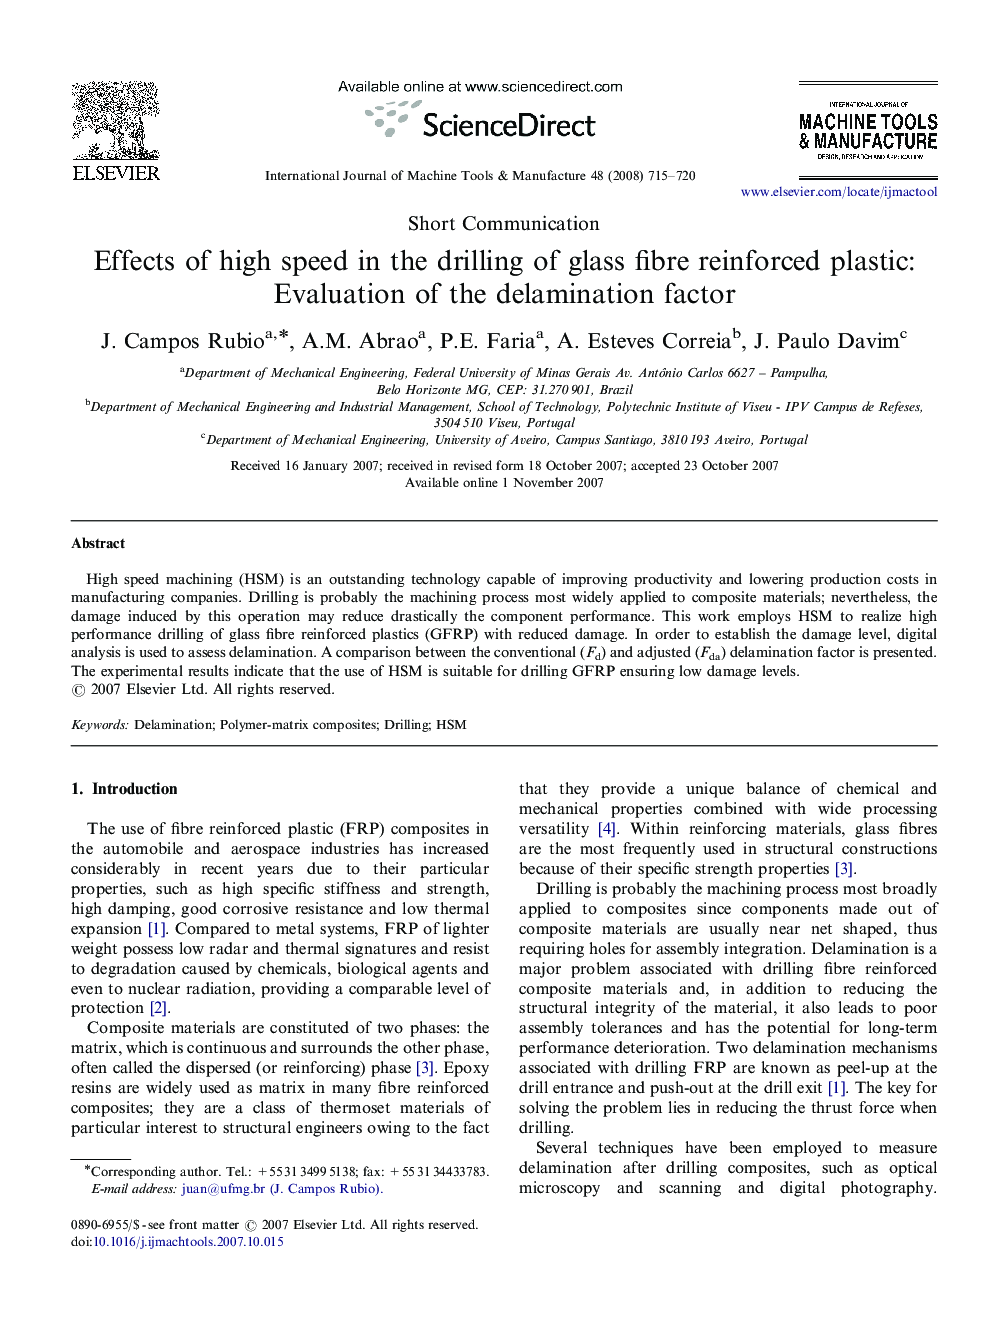 Effects of high speed in the drilling of glass fibre reinforced plastic: Evaluation of the delamination factor